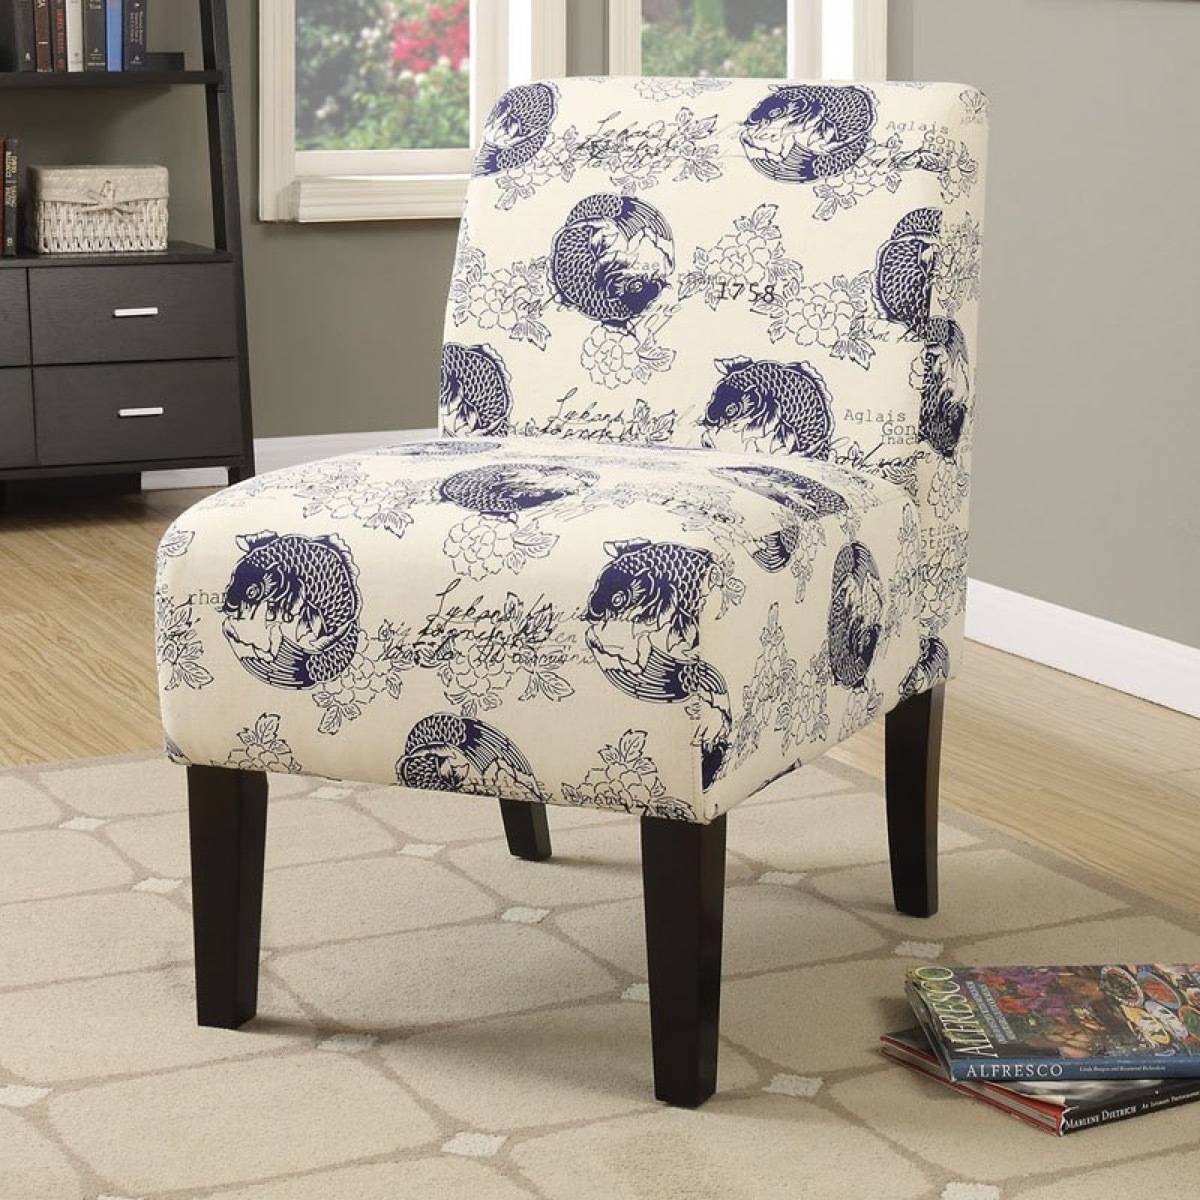 Ollano accent chair from Hayneedle